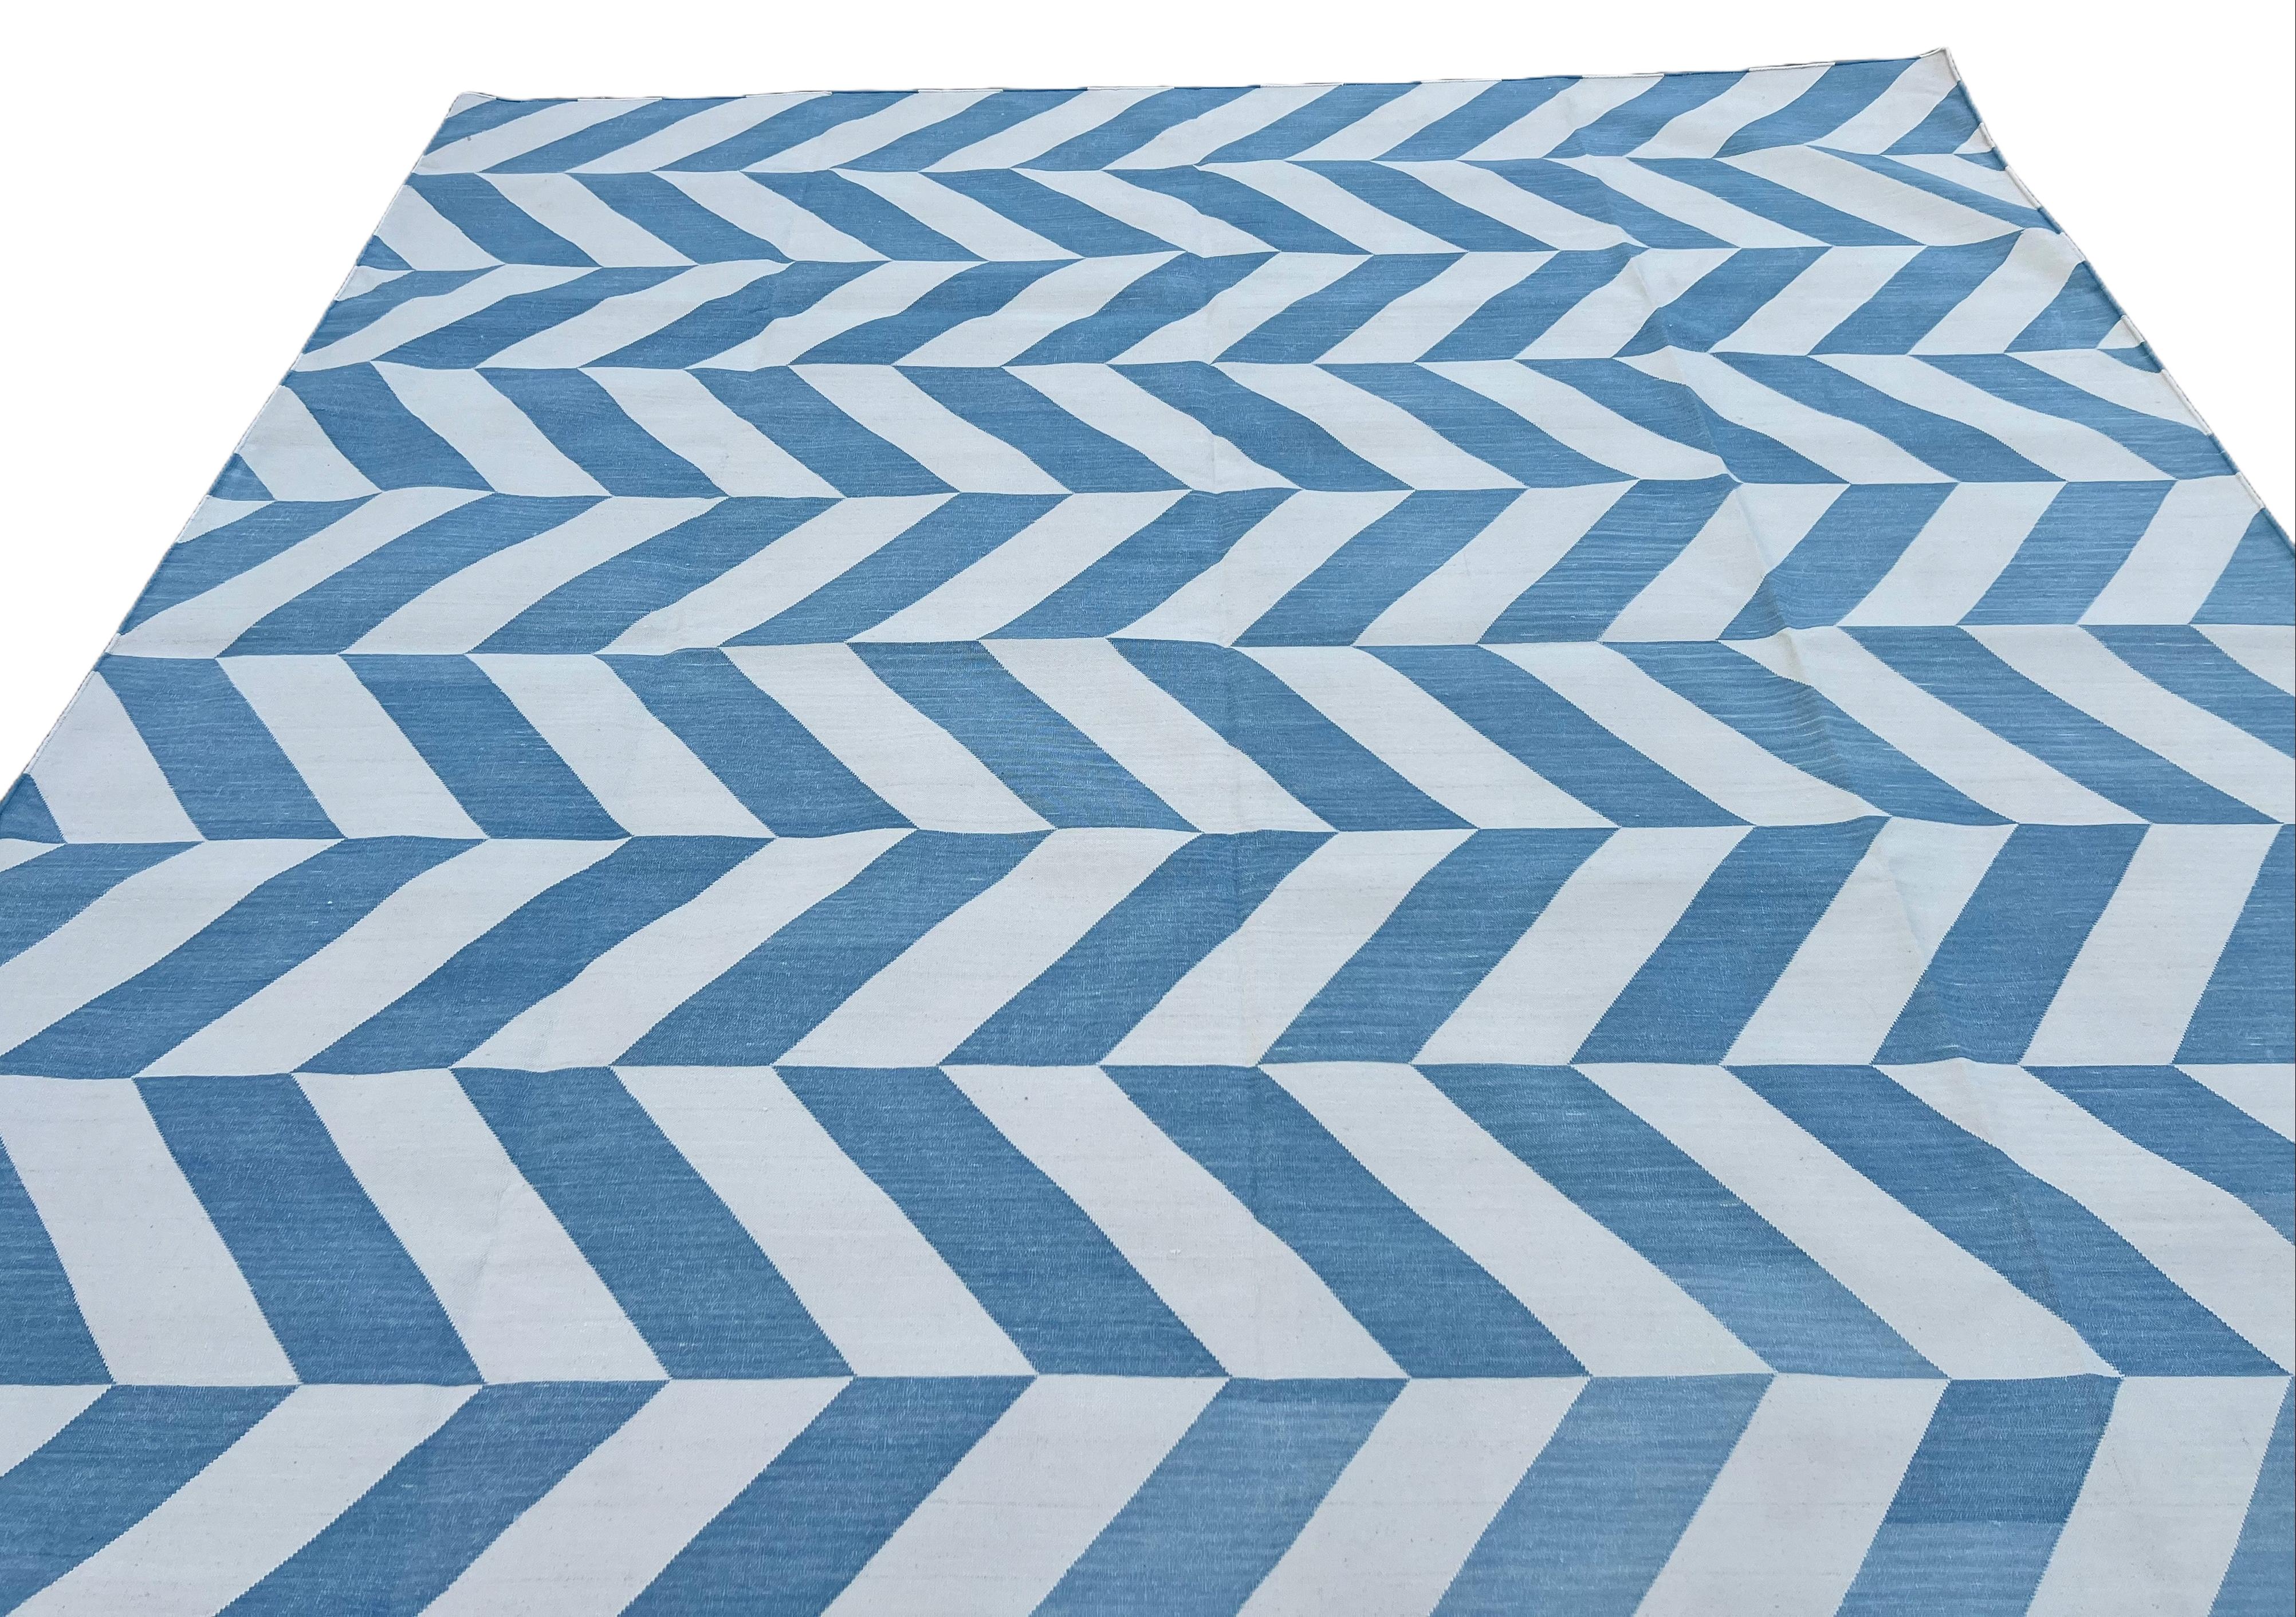 Handmade Cotton Area Flat Weave Rug, Sky Blue And White Zig Zag Striped Dhurrie For Sale 4